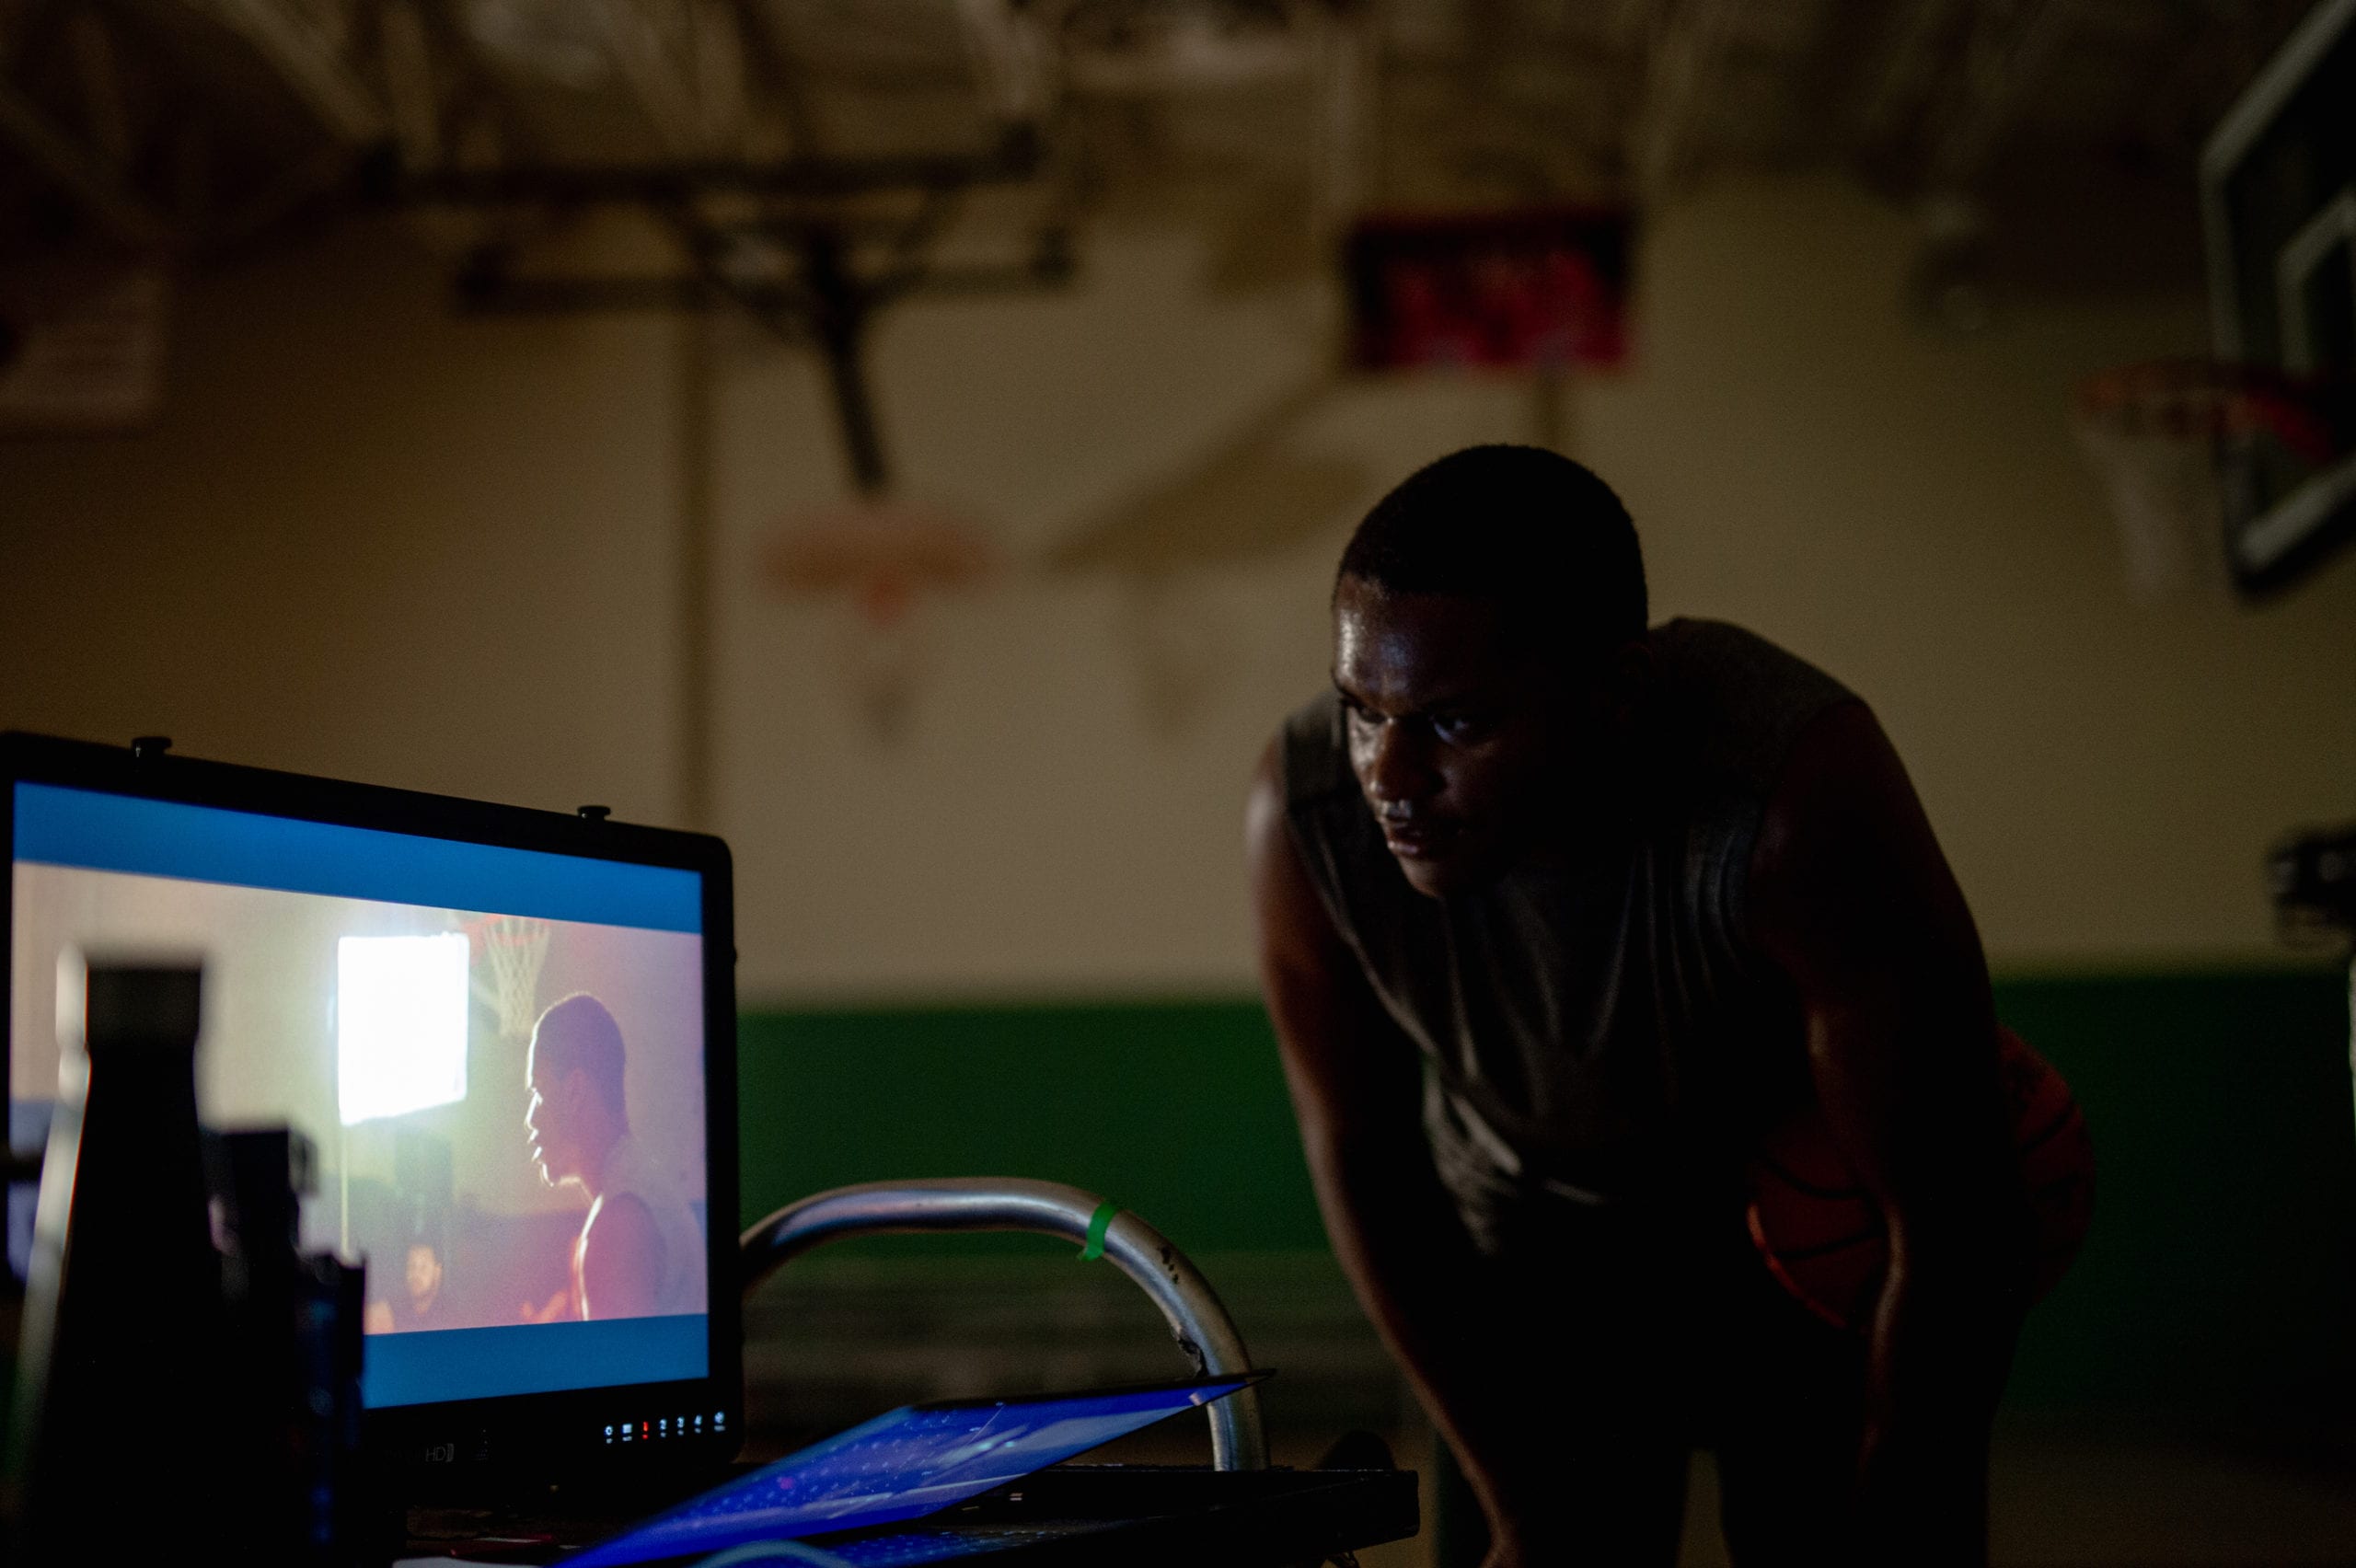 Nike On a basketball court in a gym with an African American man wearing a gray t shirt holding a ball looking at the video display